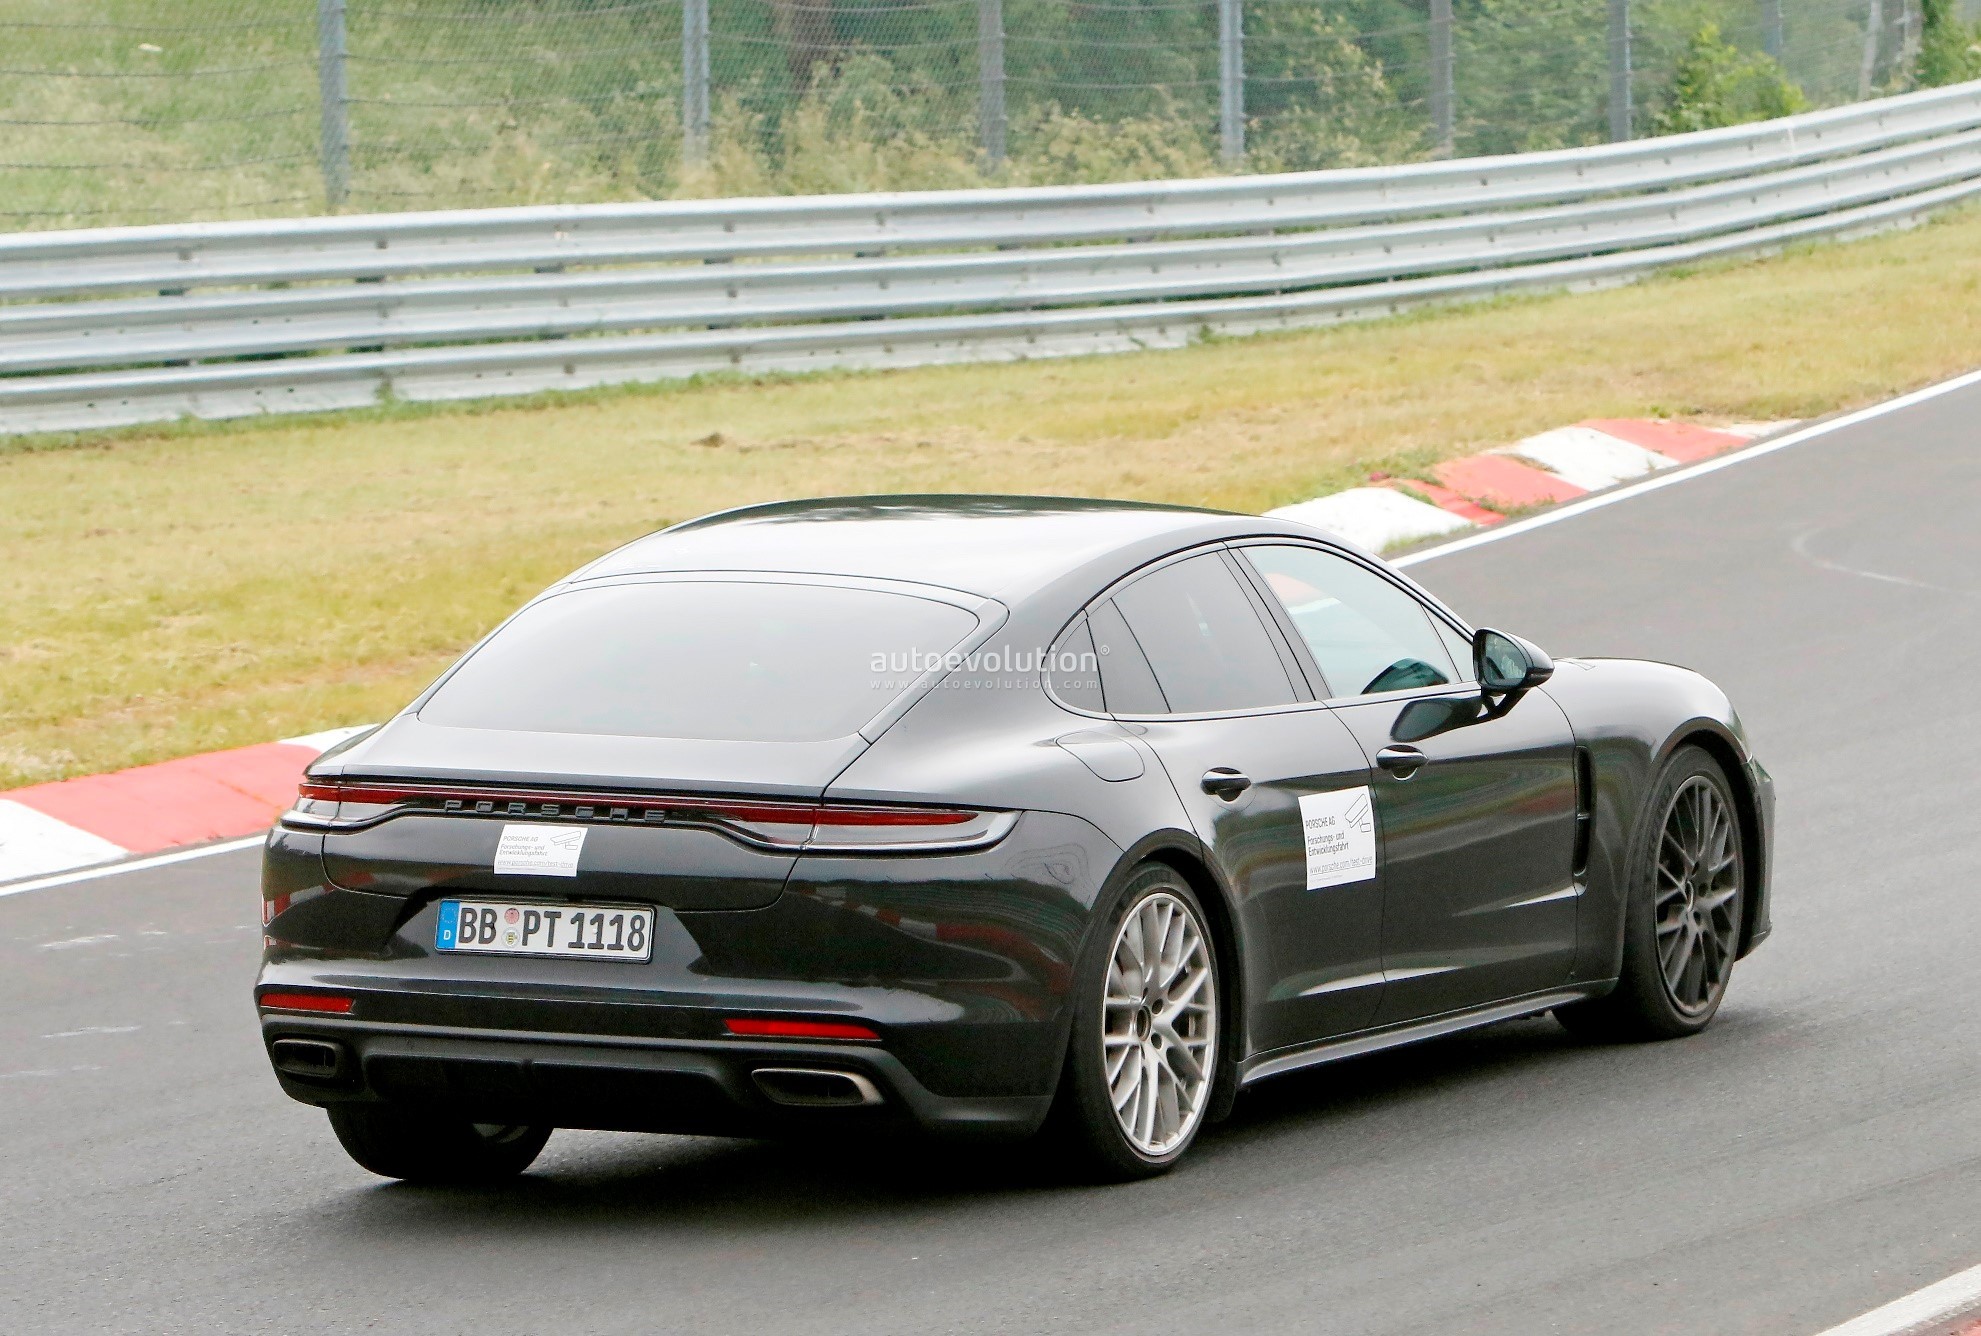 2023 Porsche Panamera Facelift Spied Flaunting Large Side Intakes 13 